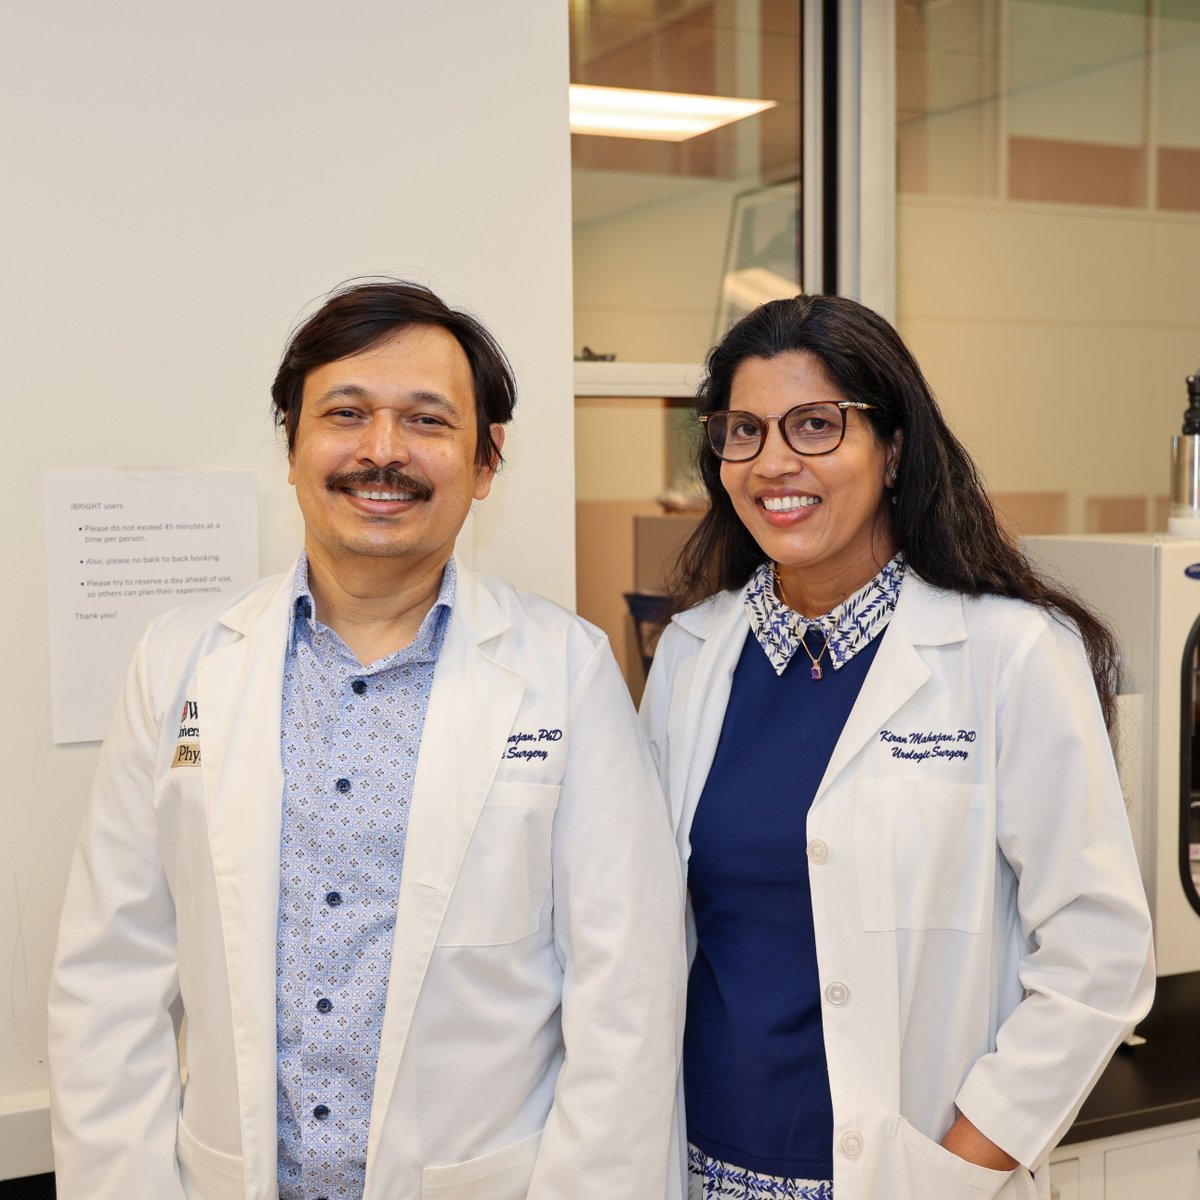 Duminduni Hewa Angappulige joined Nupam Mahajan, PhD, and Kiran Mahajan, PhD, to outline the epigenetic underpinnings of tumor-immune dynamics in prostate cancer immune suppression. Read the article recently published in Trends in Cancer: sciencedirect.com/science/articl…